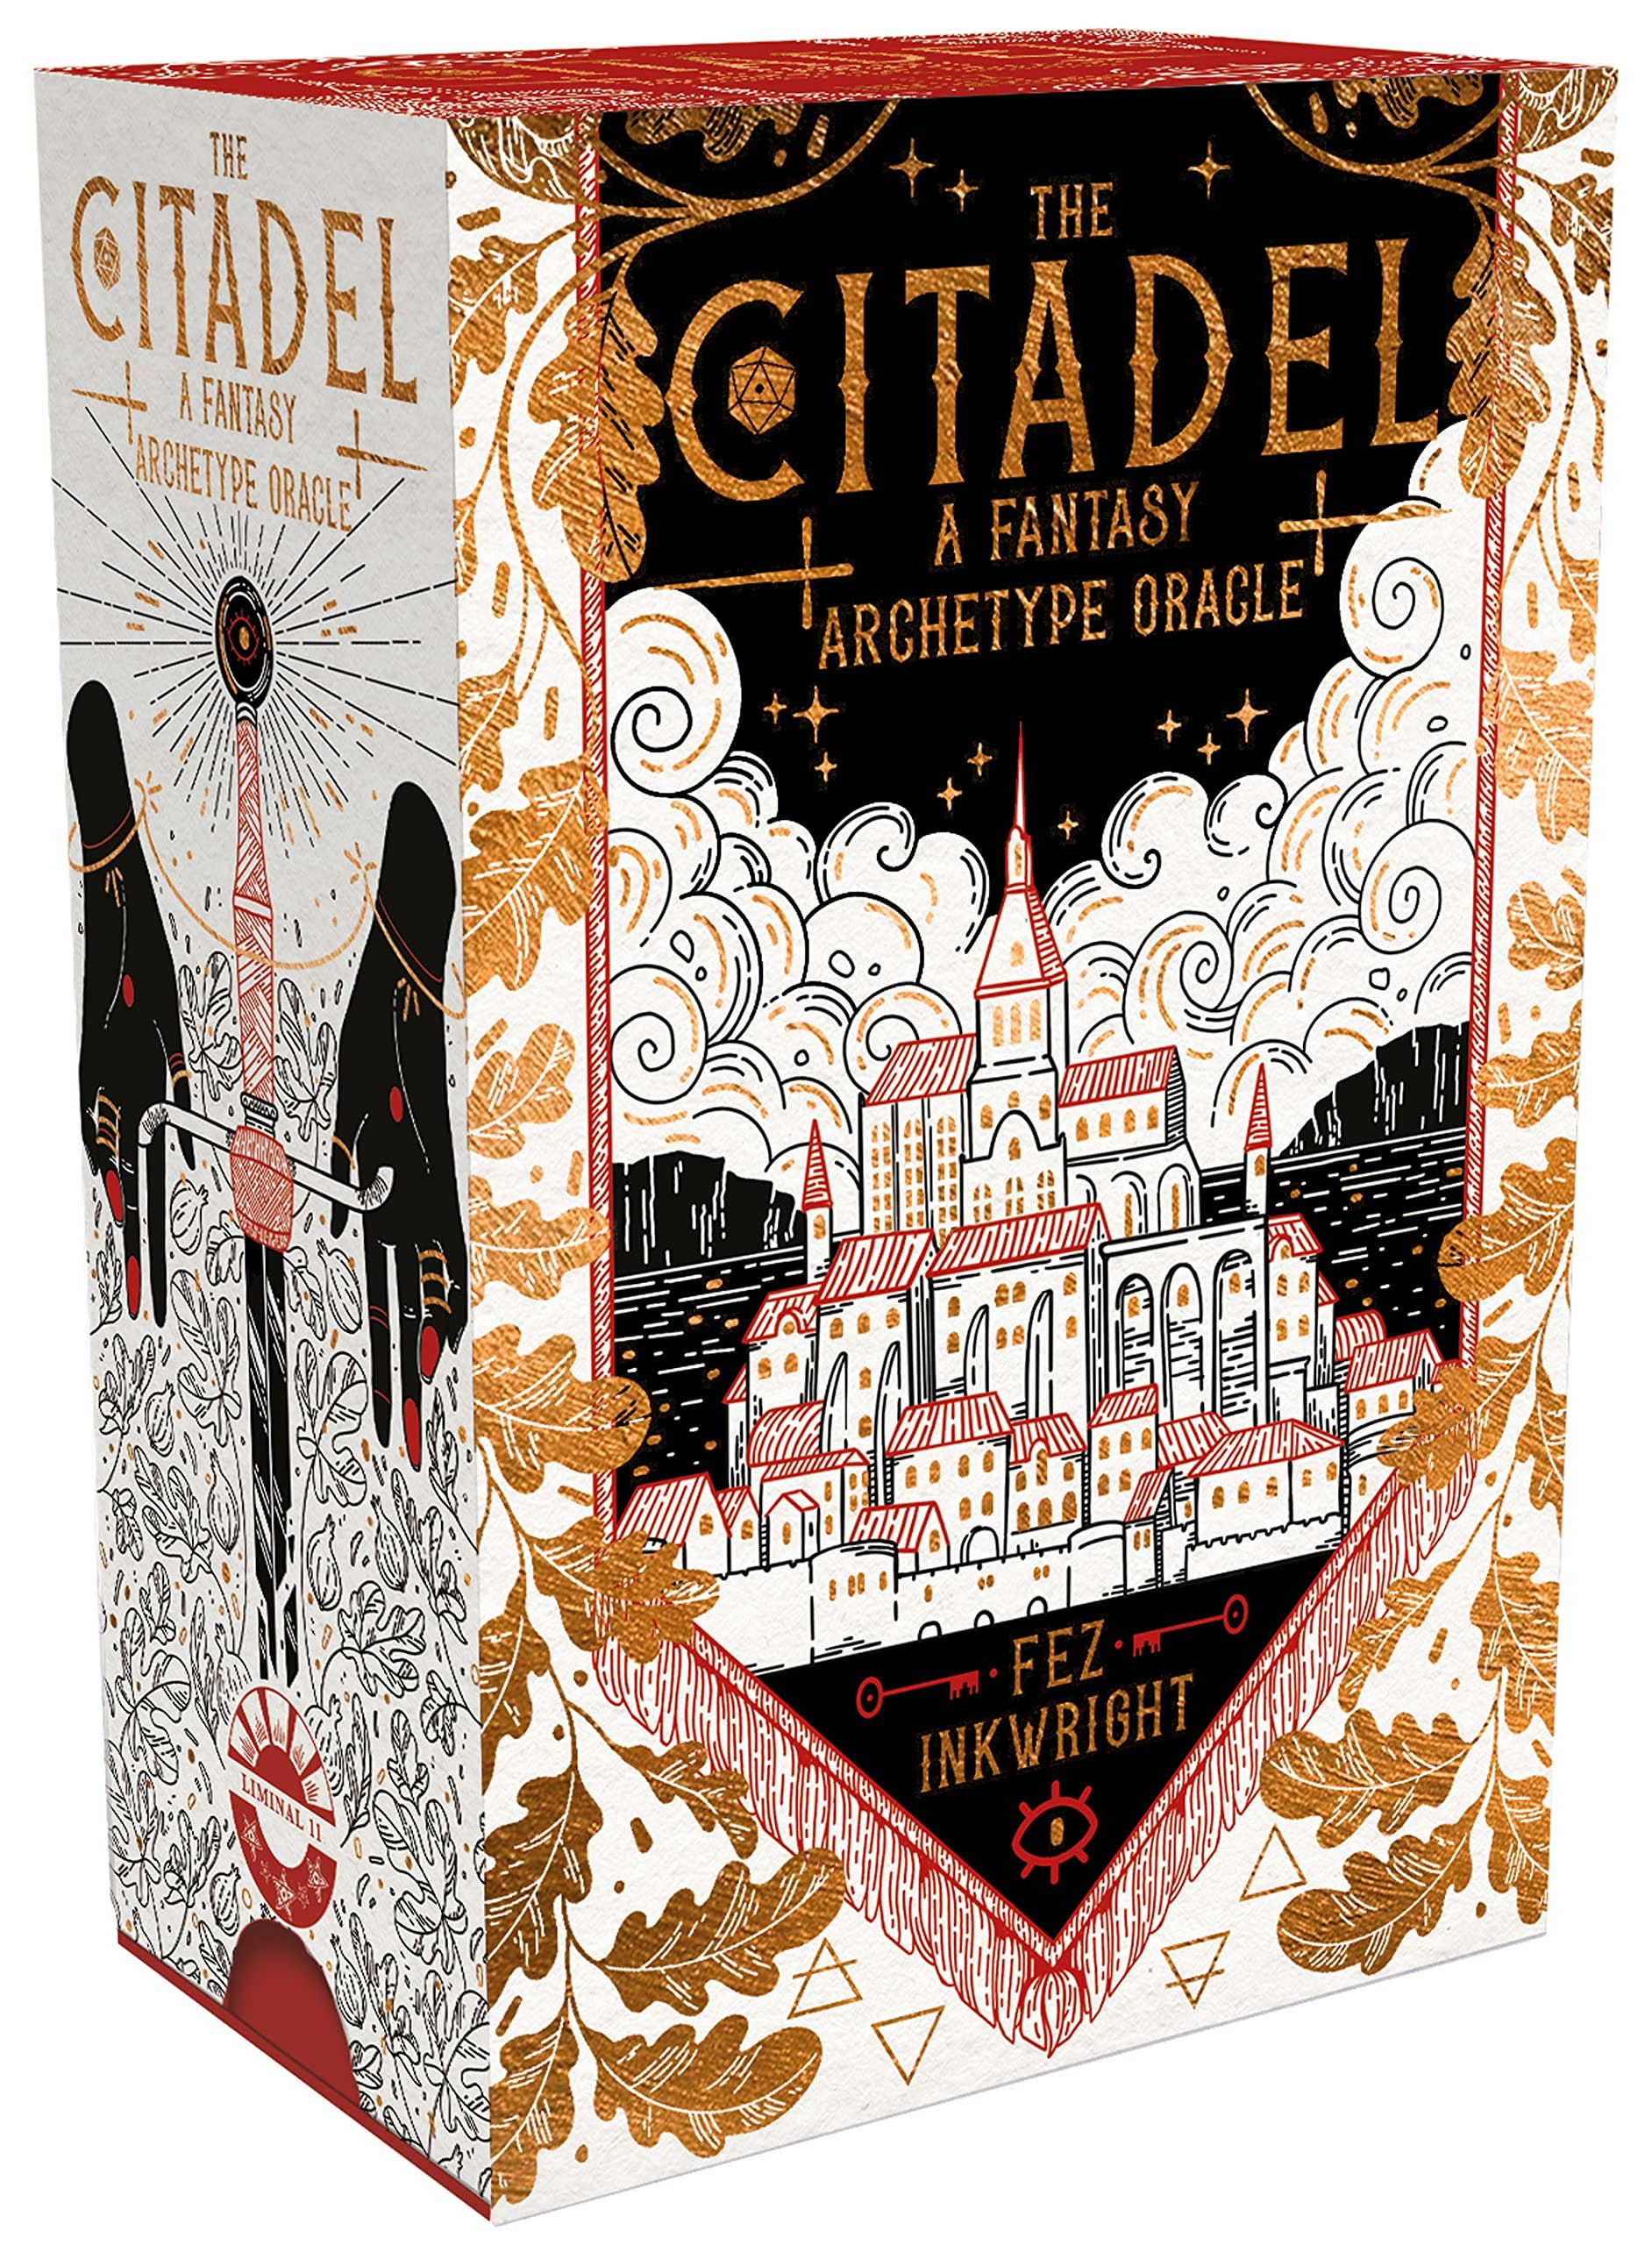 The Citadel: A Fantasy Oracle by Fez Inkwright